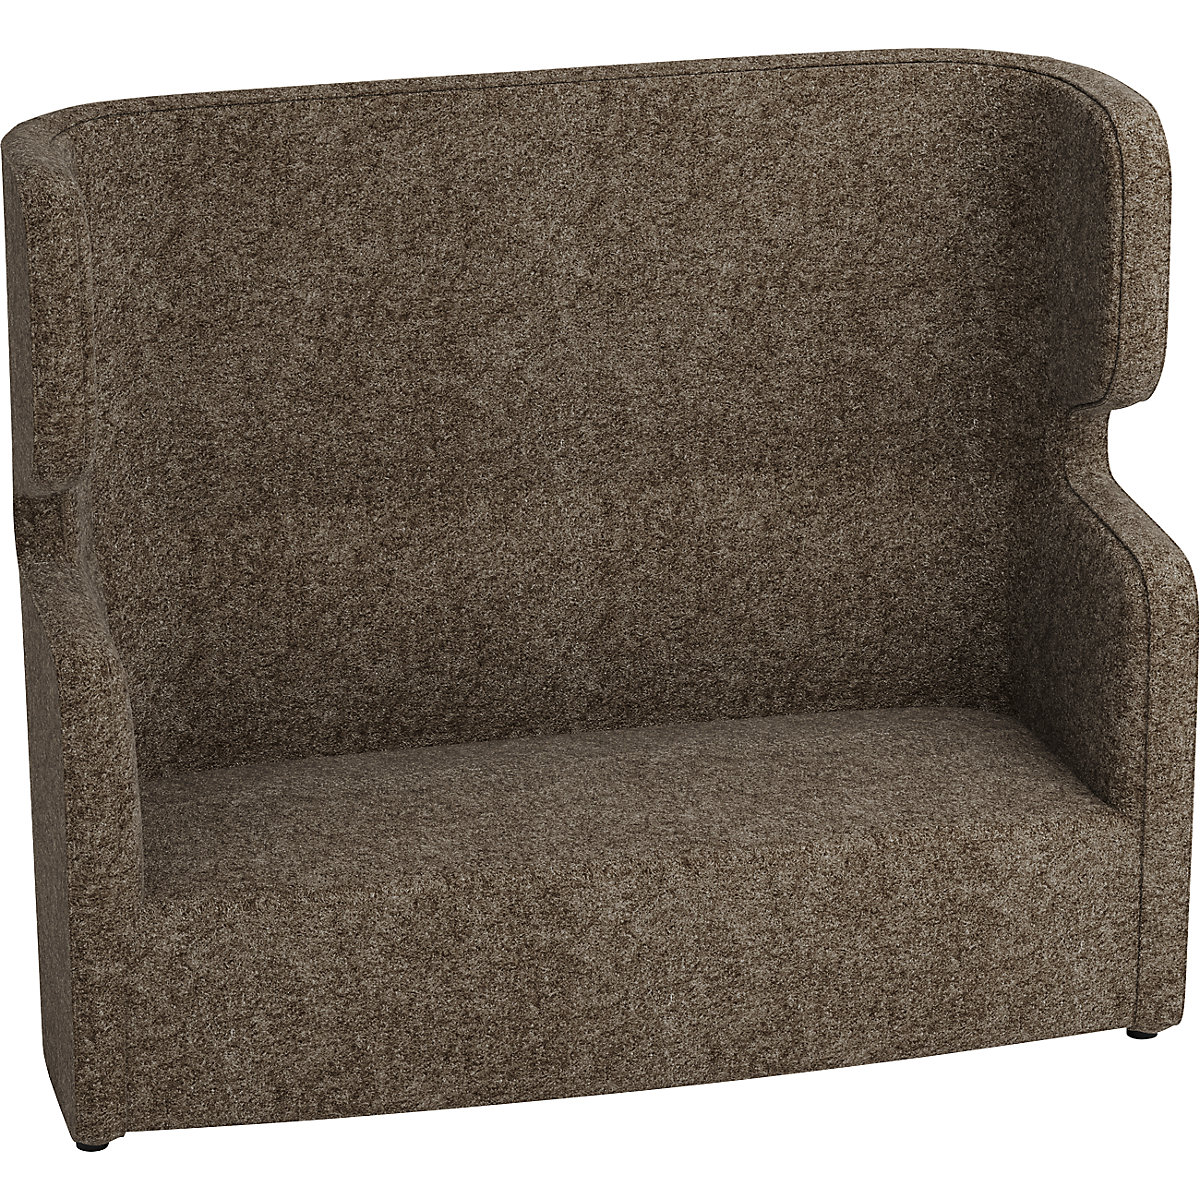 VIVO acoustic sofa – BISLEY, two-seater with high back rest, grey brown